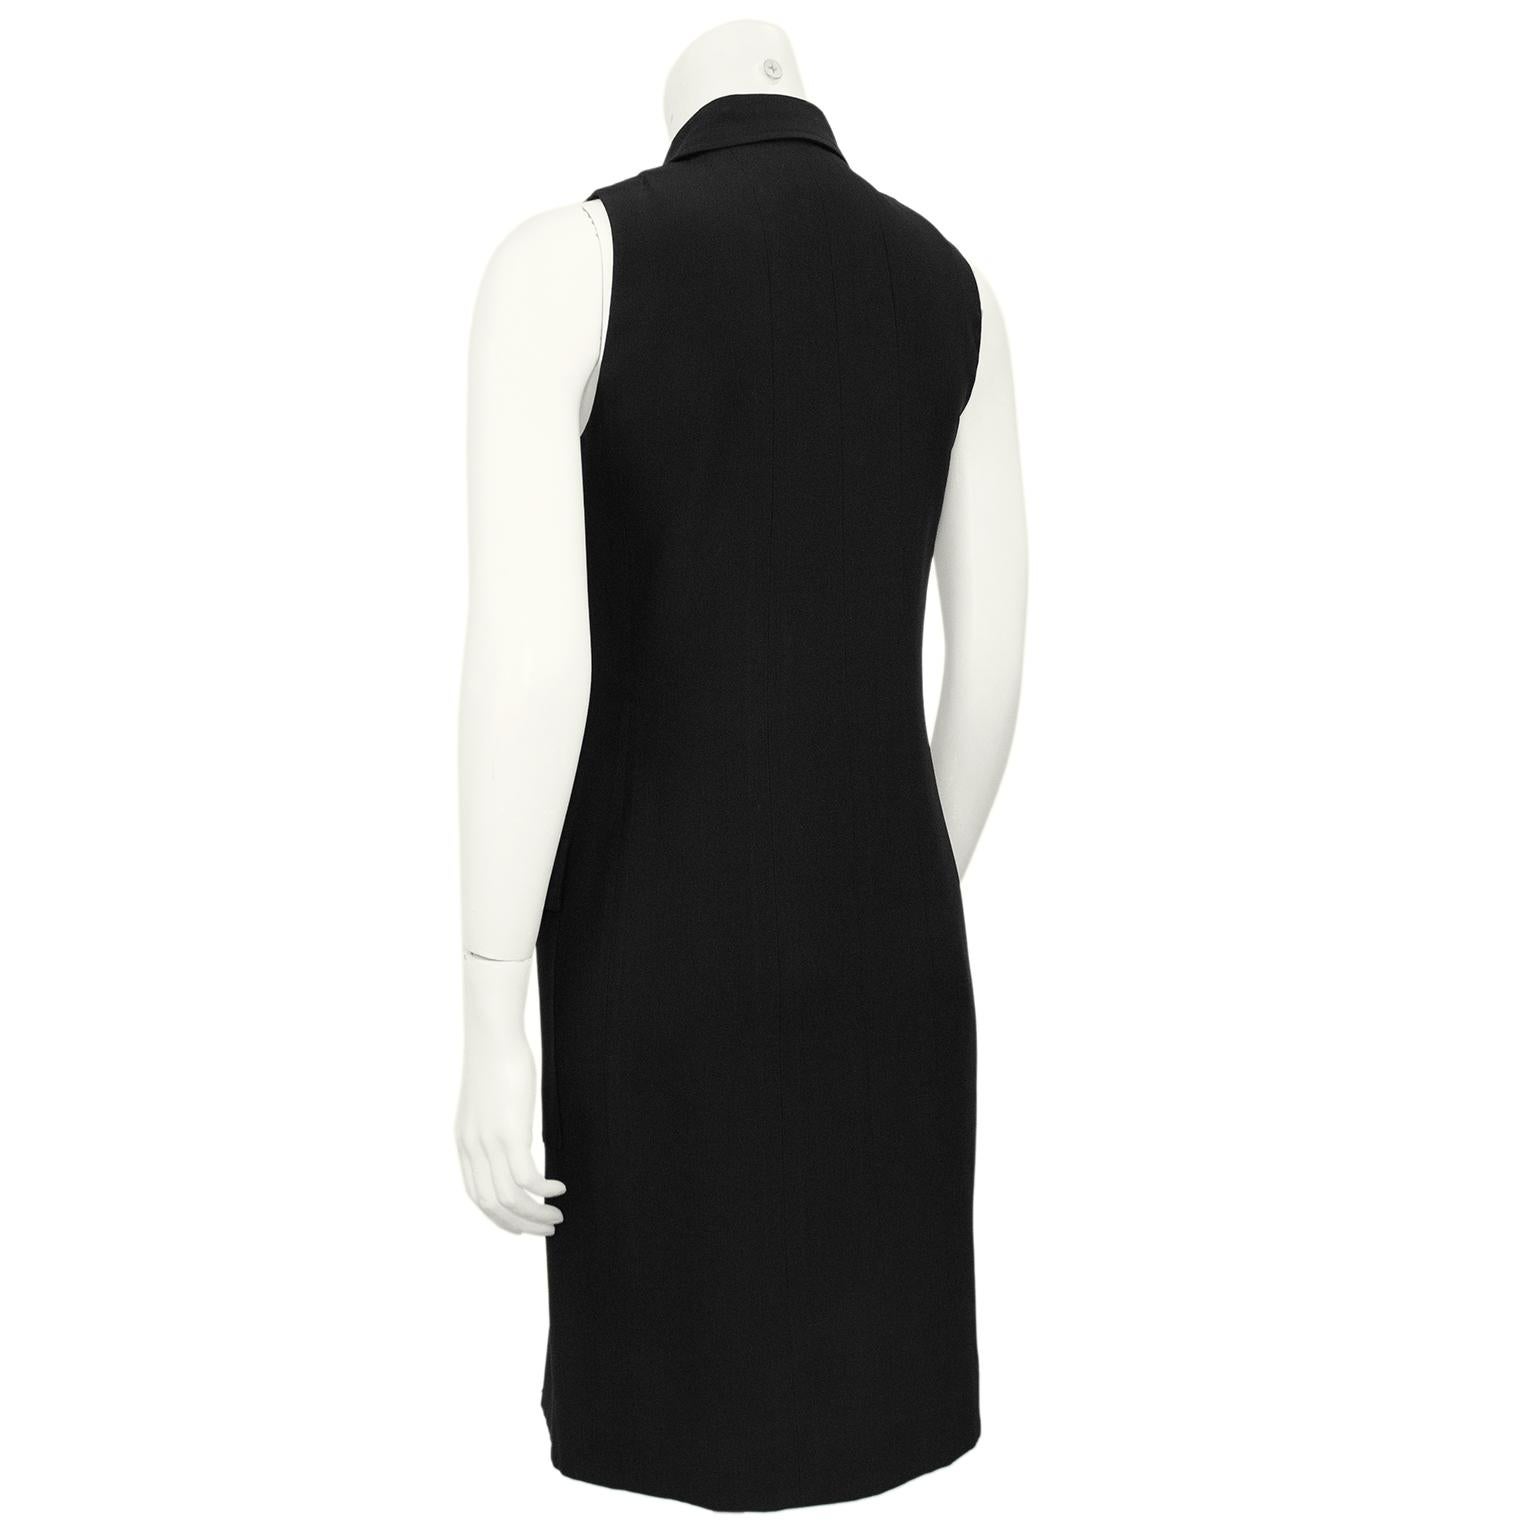 Spring 1997 Chanel Black Sleeveless Crepe Shirtdress In Good Condition For Sale In Toronto, Ontario